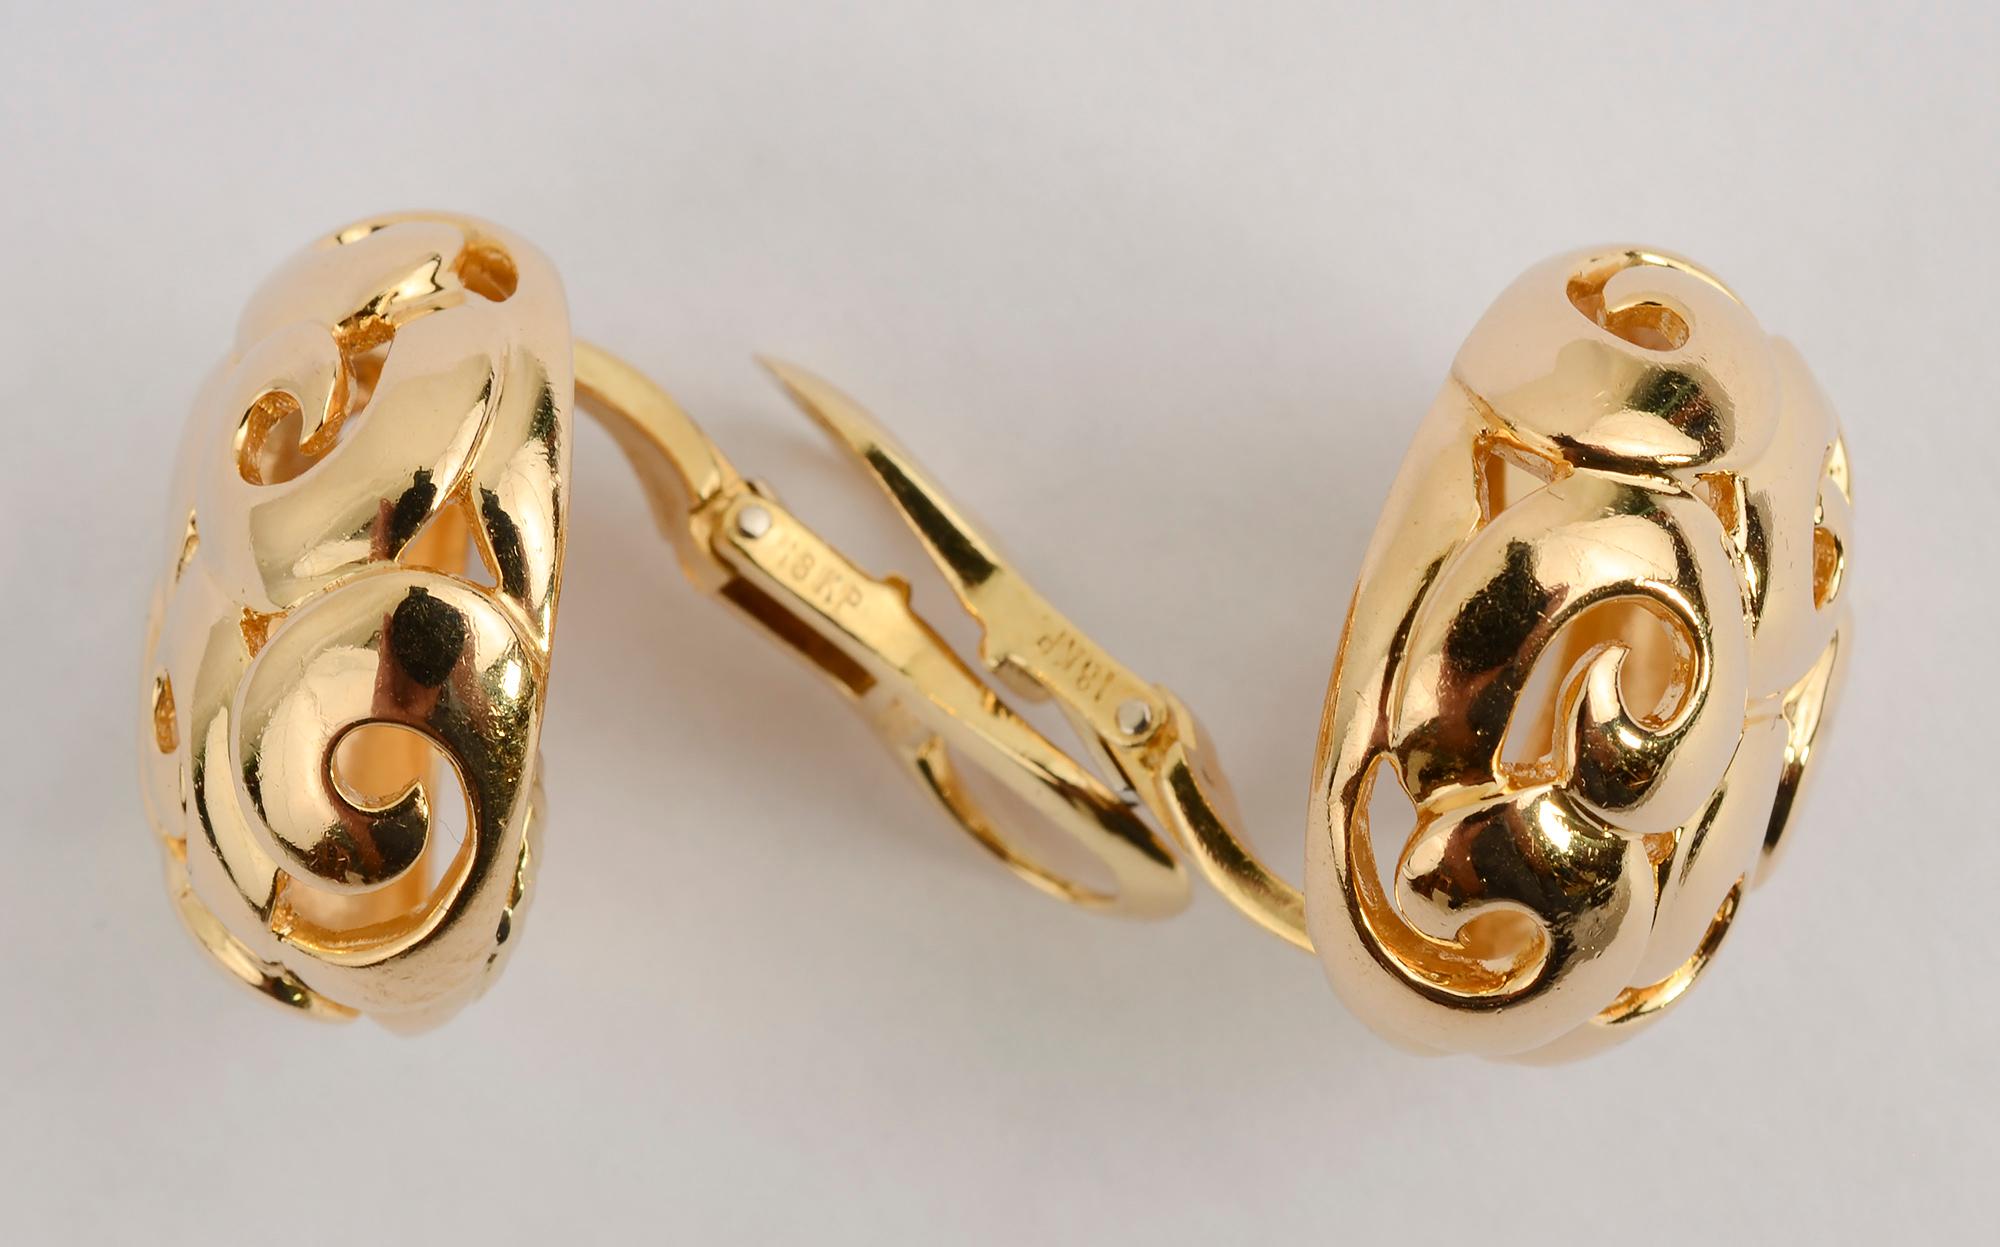 Gold dome earrings by Gumps with an interesting curlicue design giving open  space next to the metal. The earrings are 7/8 inch in diameter. Clip backs can be converted to posts.